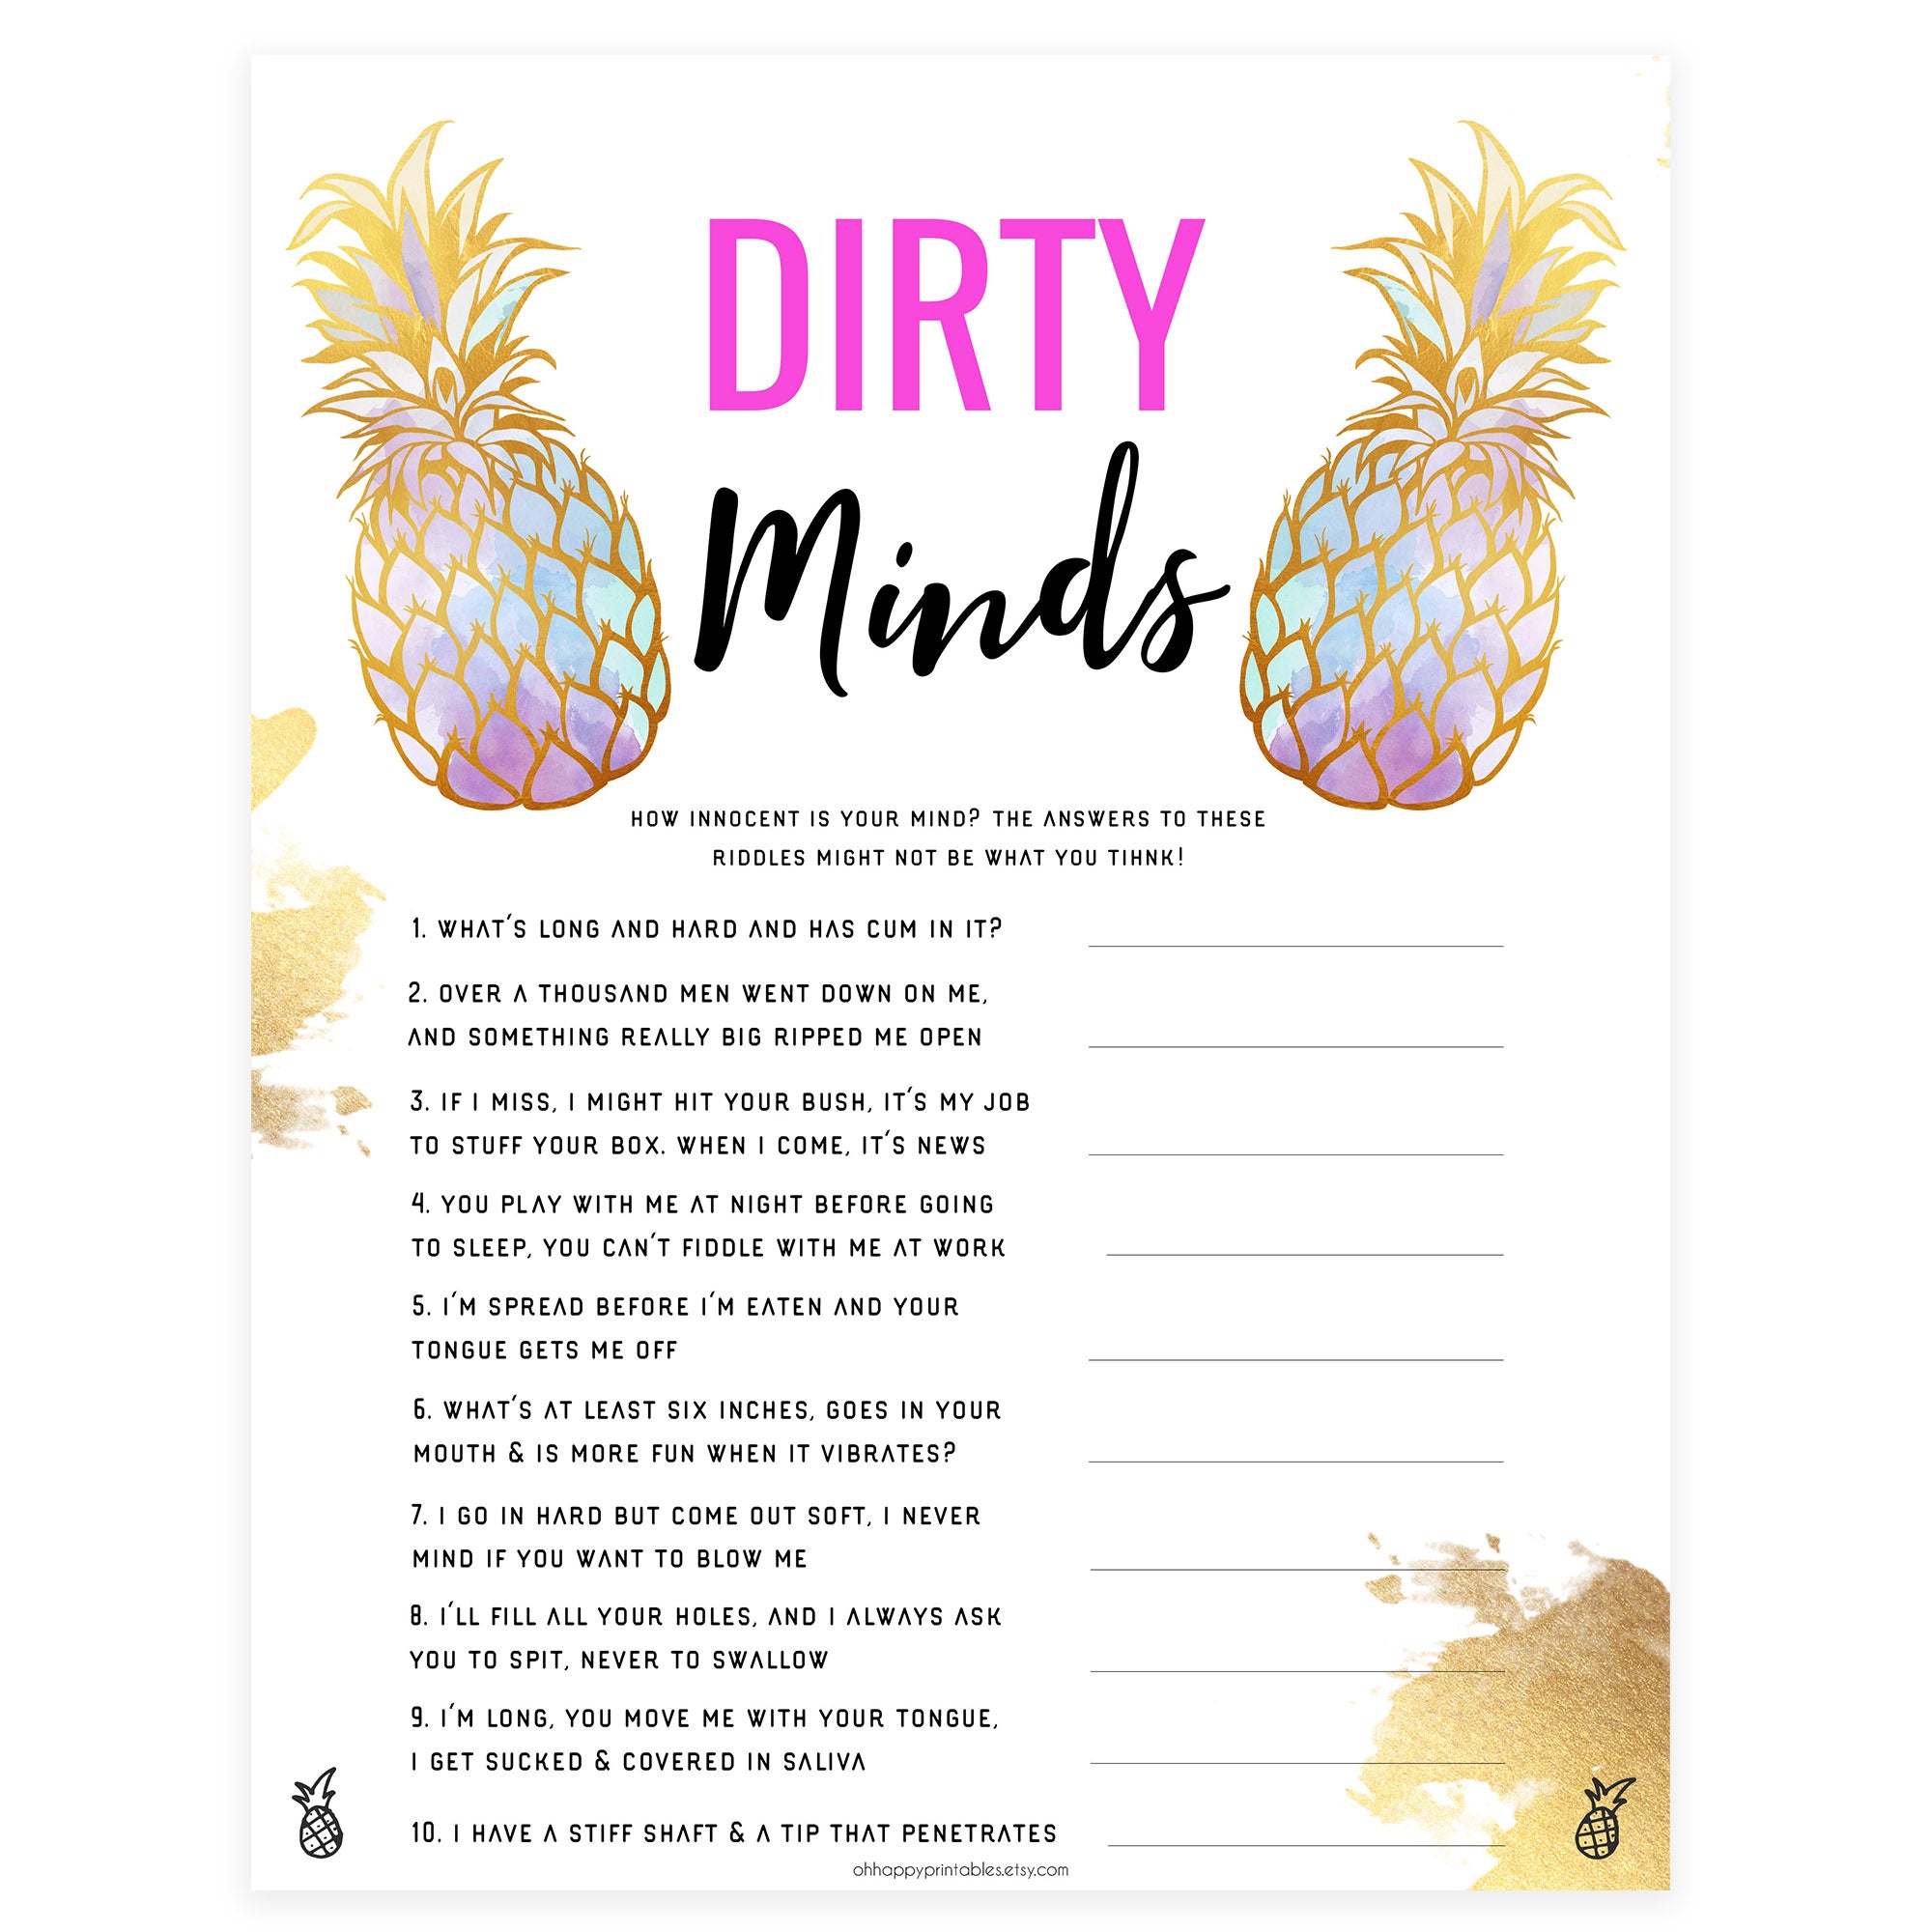 Dirty Minds - Gold Pineapple